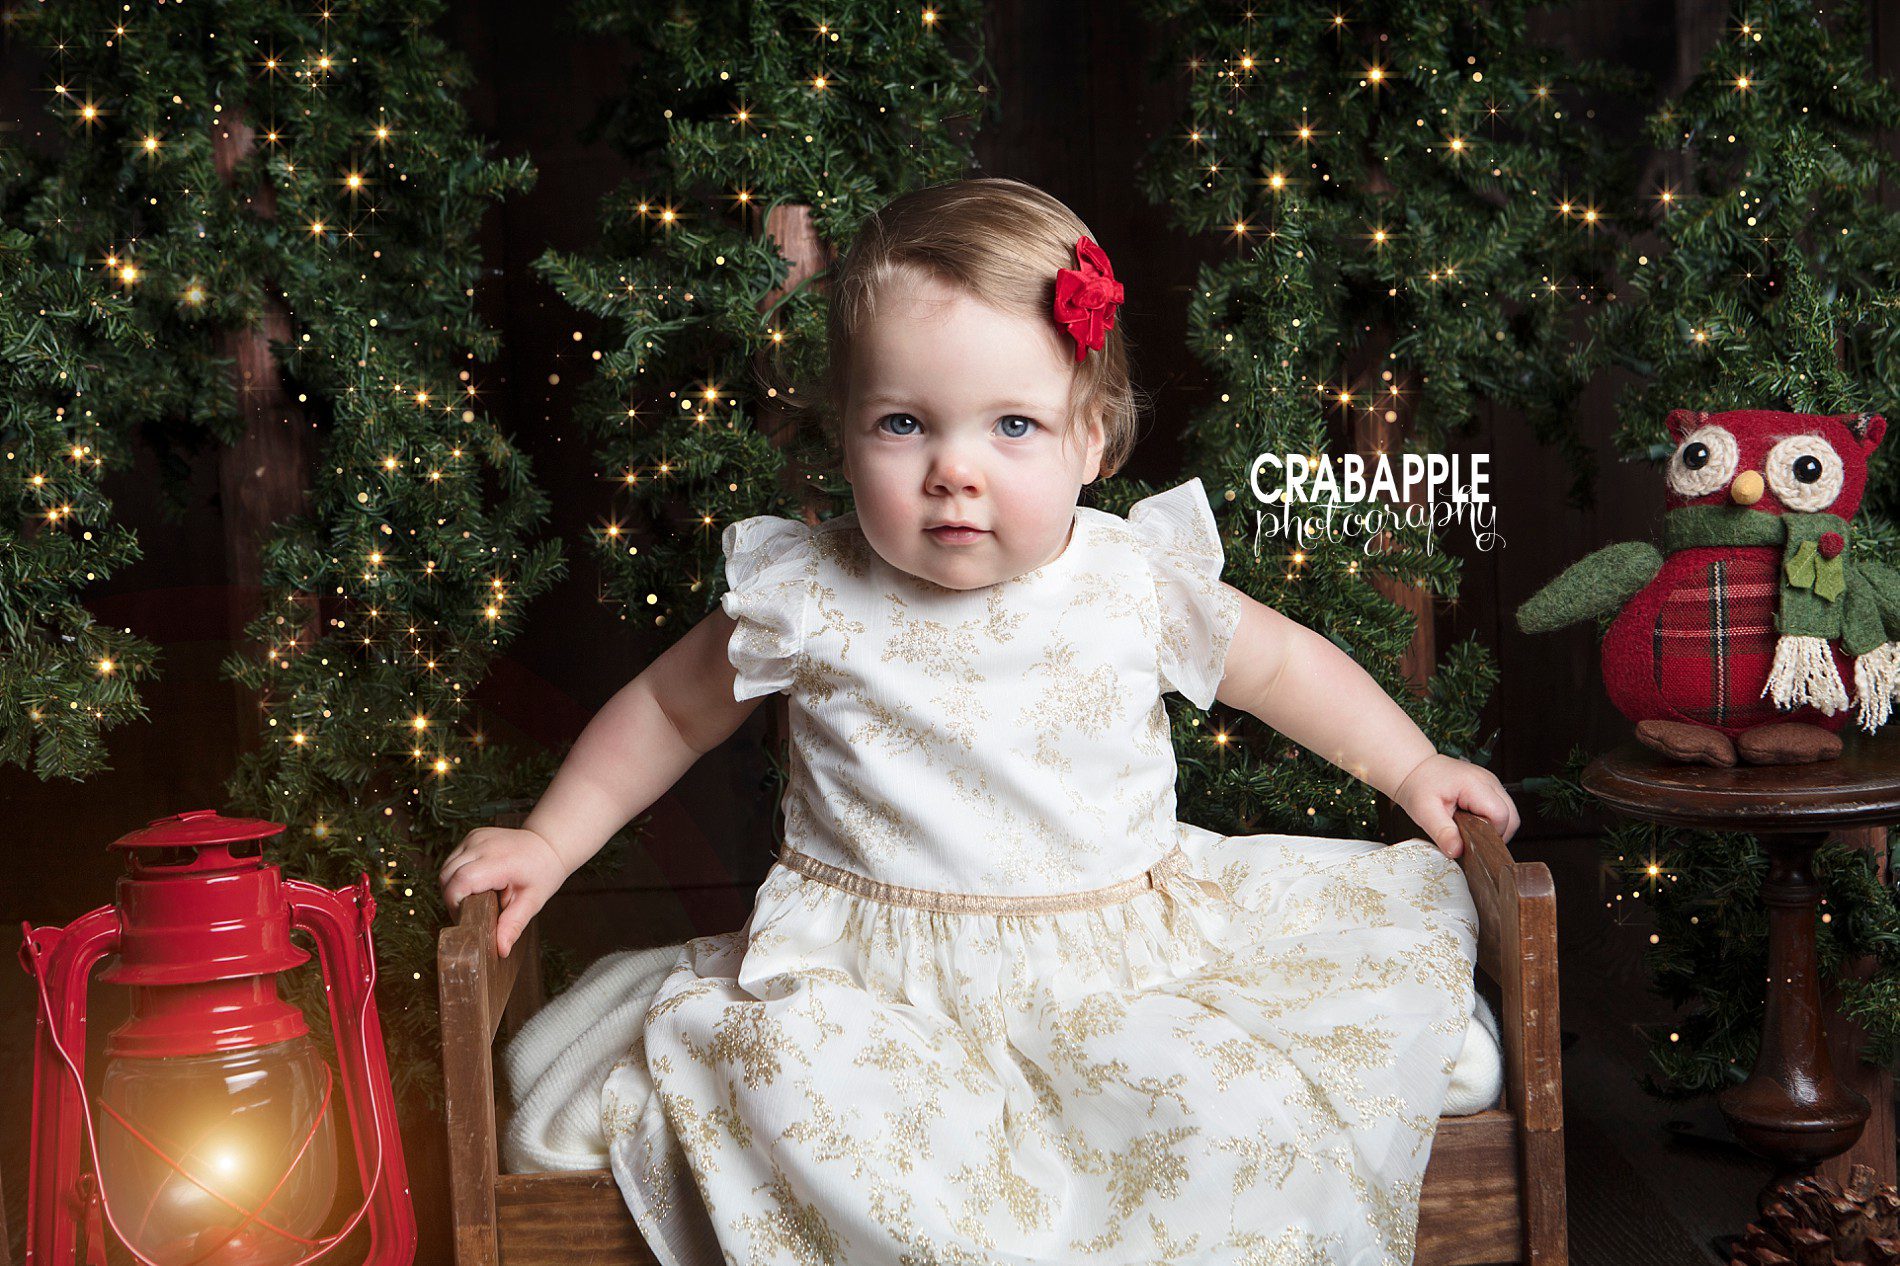 What to Wear for Christmas Photos · Crabapple Photography